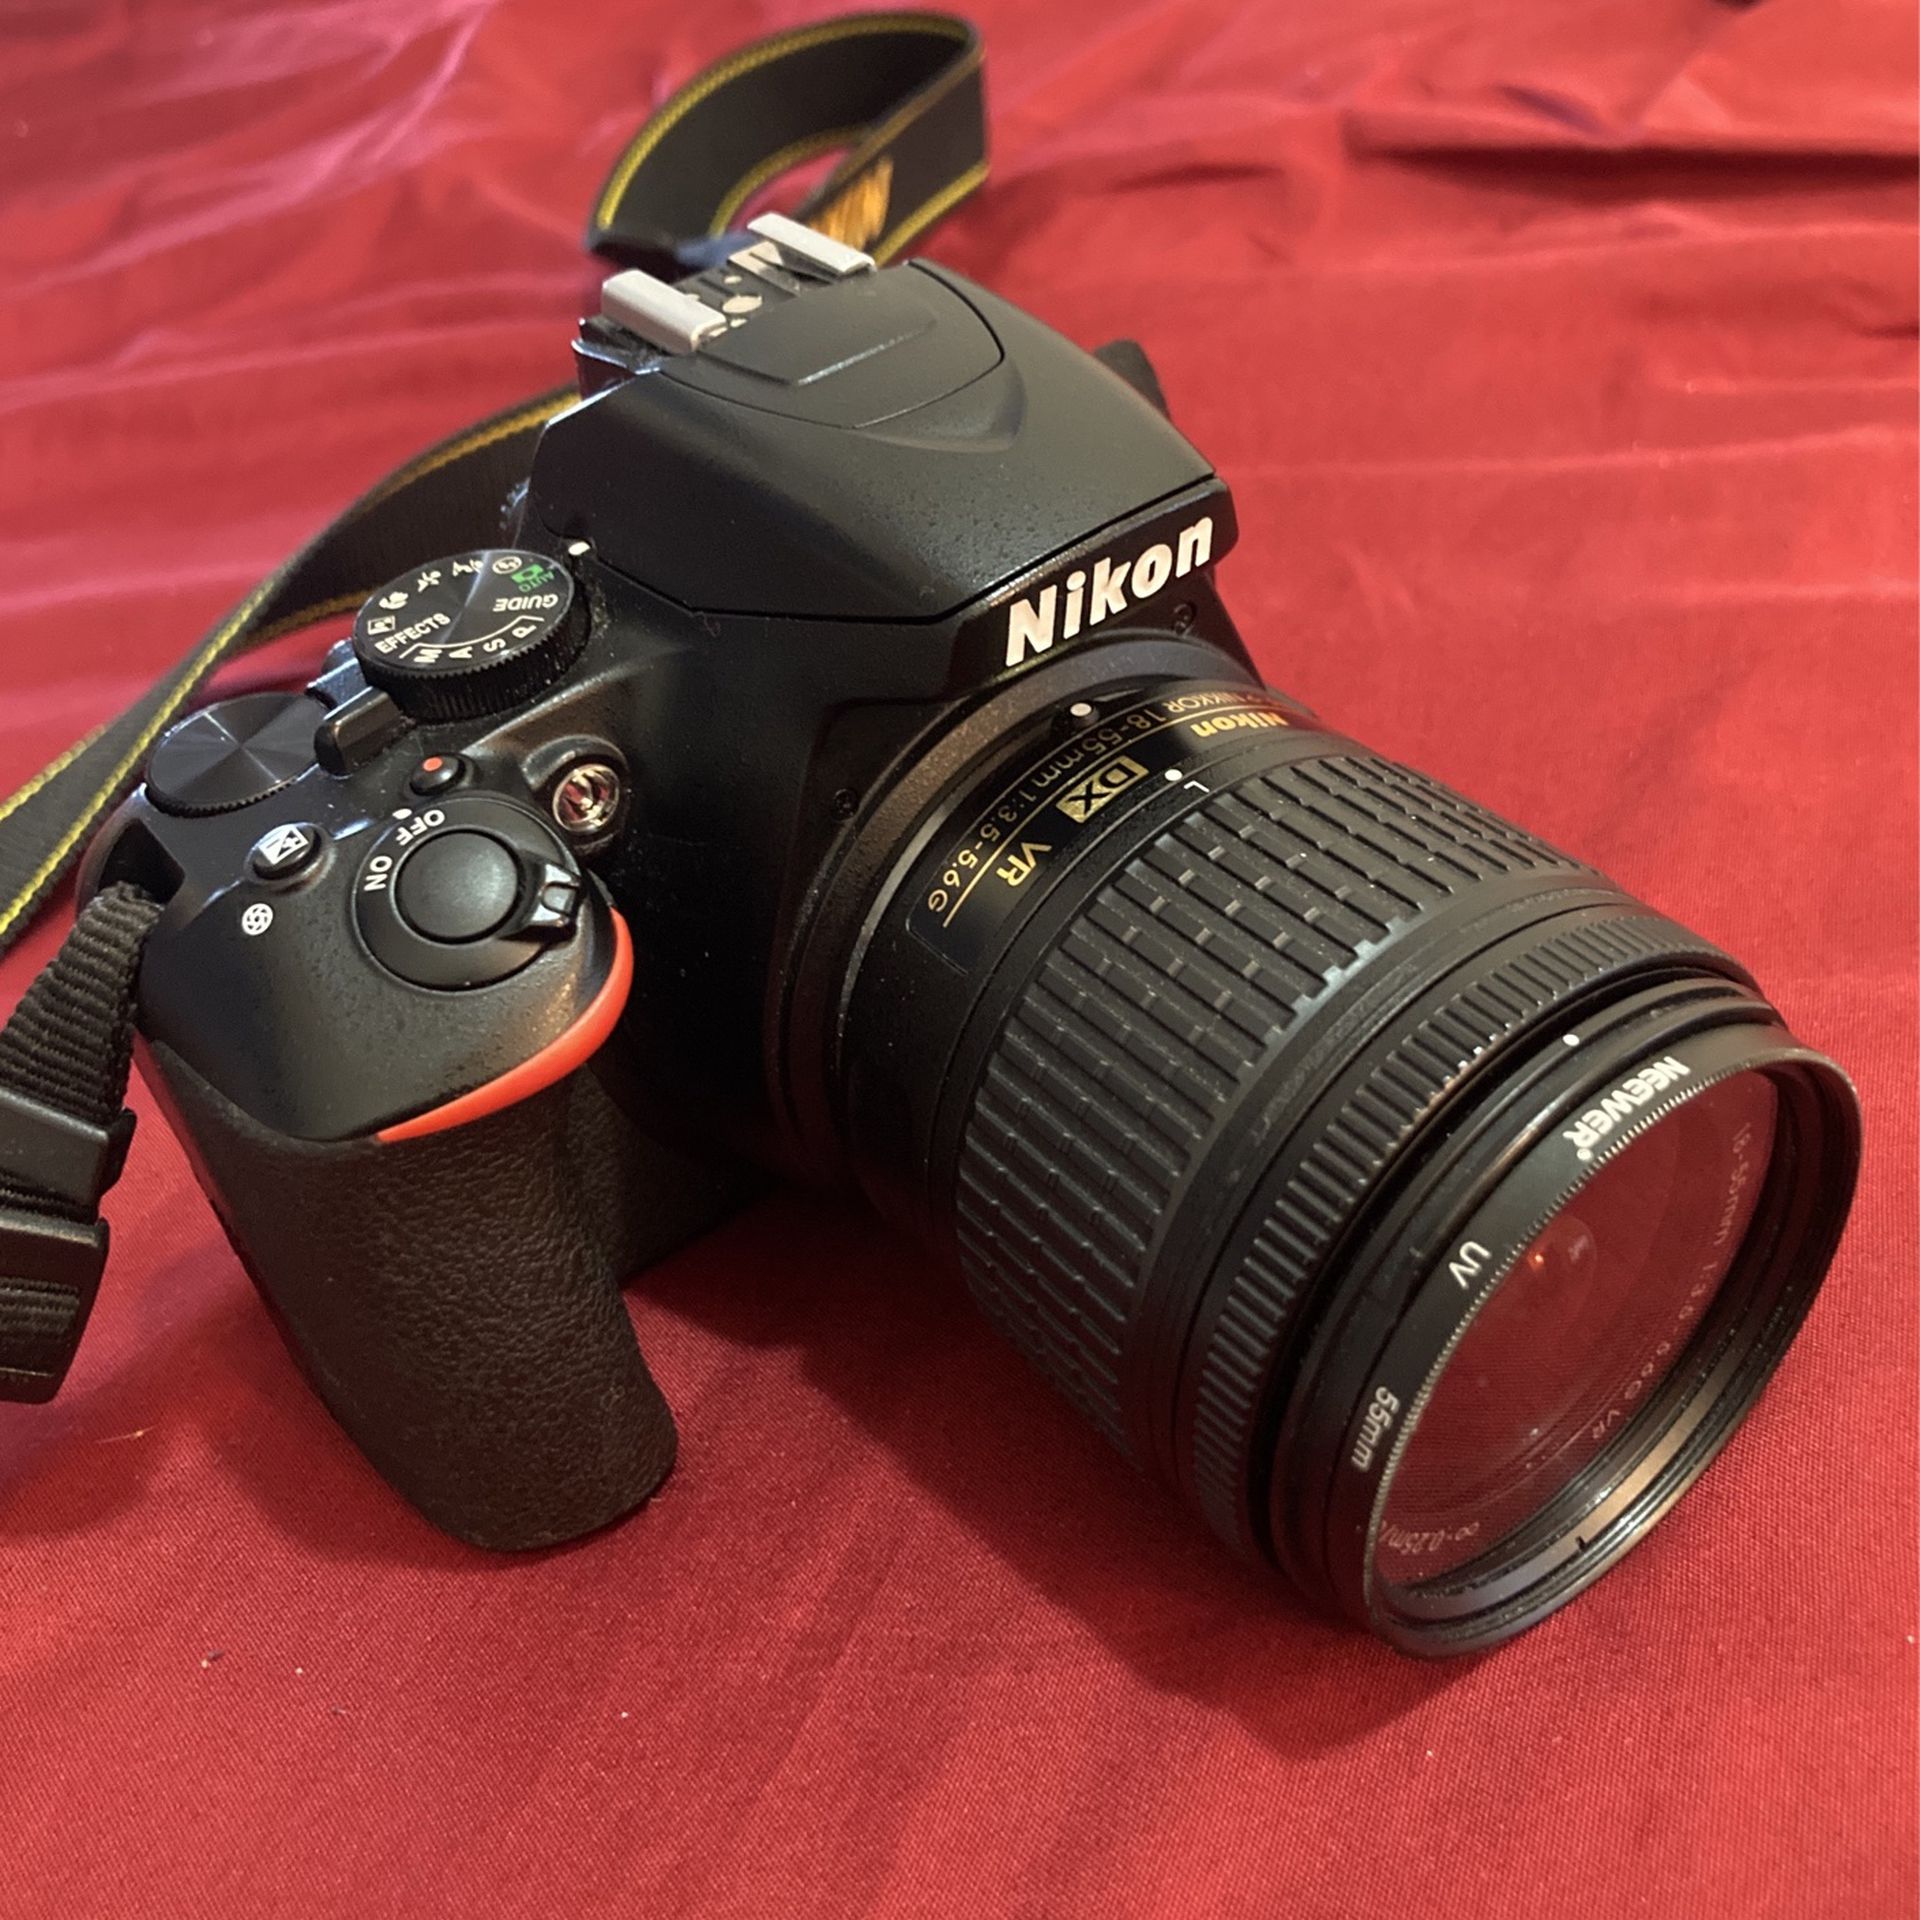 Nikon D3500 With 55mm Wide Angle Lens And 55mm Telephoto Lens